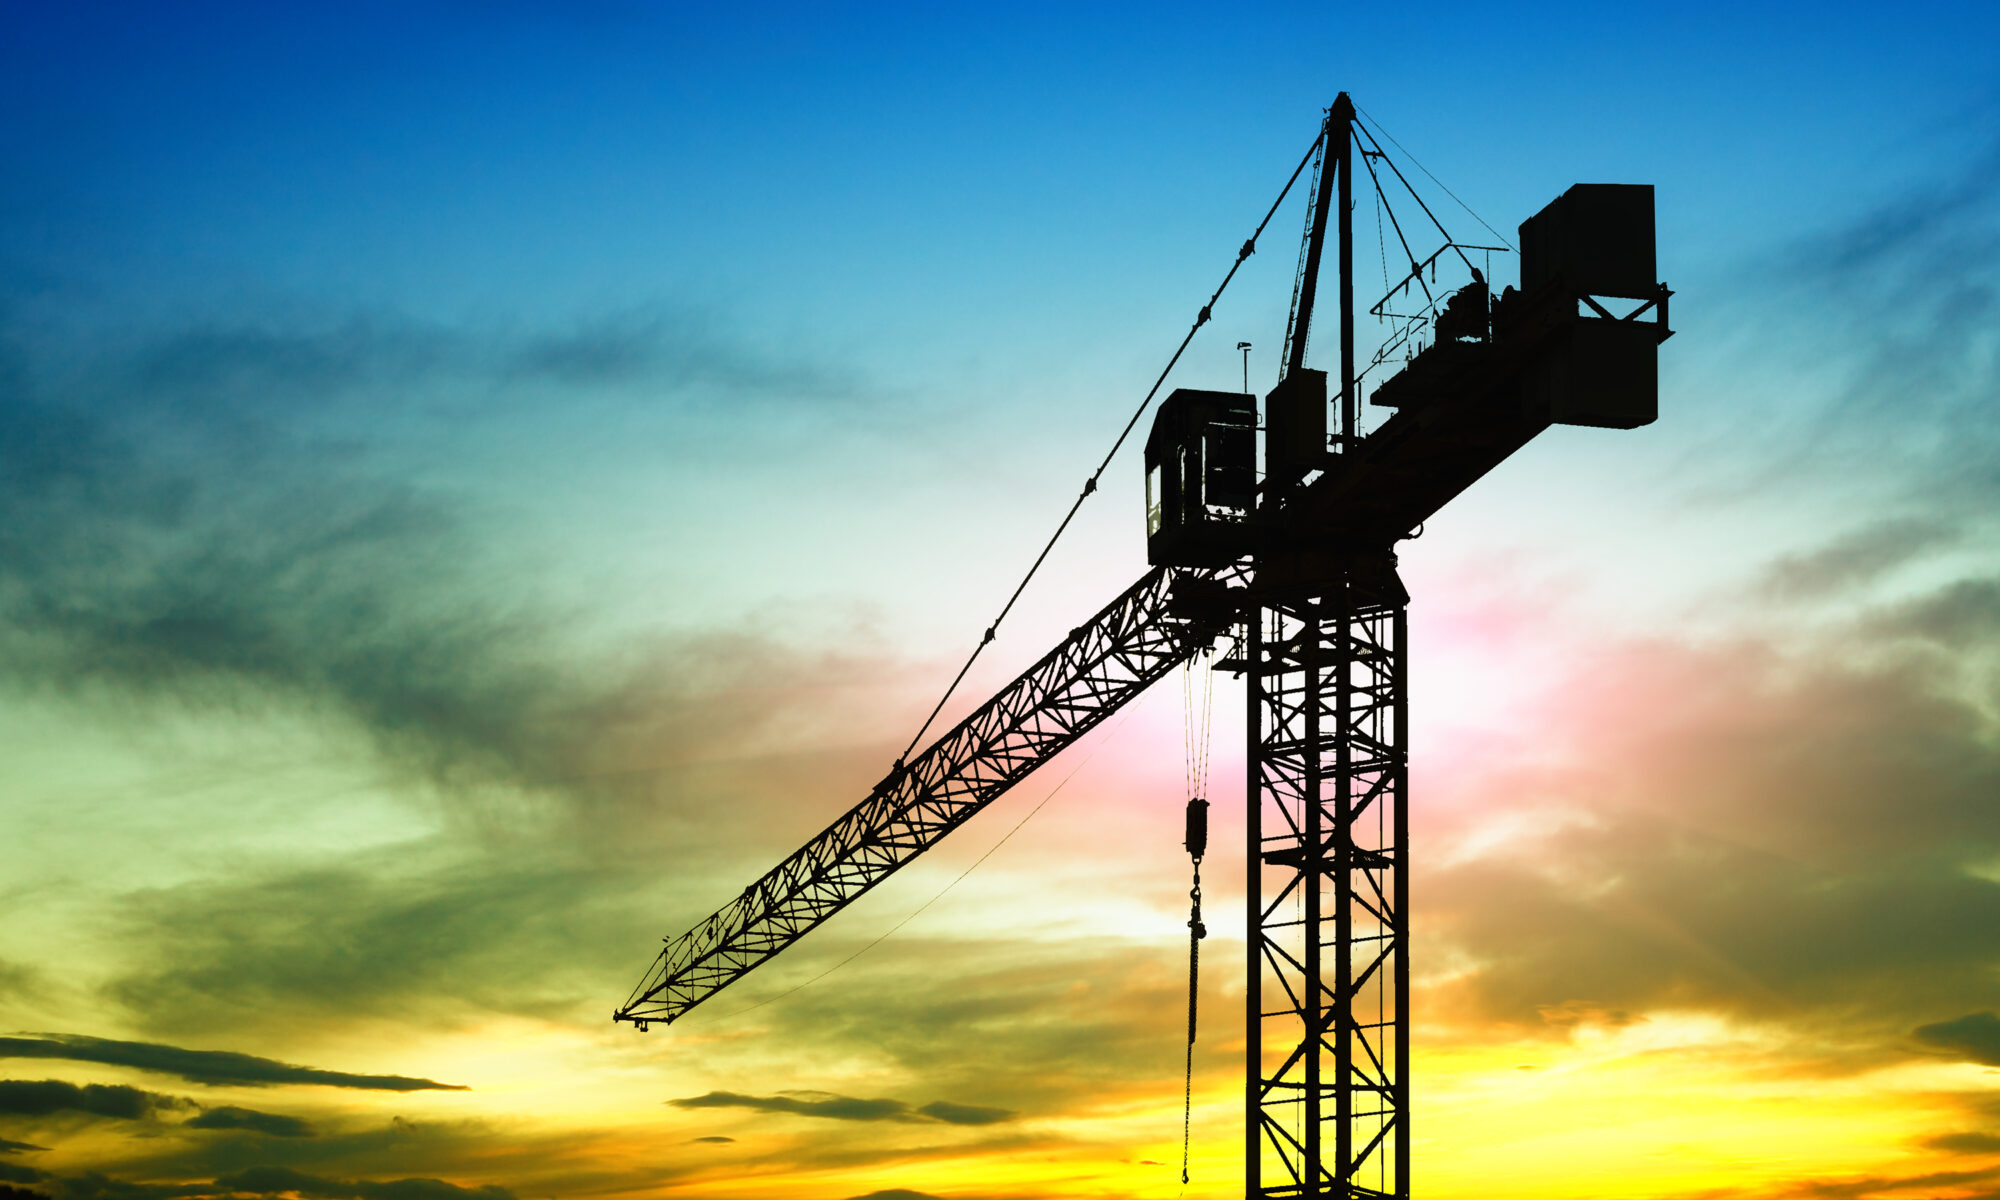 ERP for construction industry